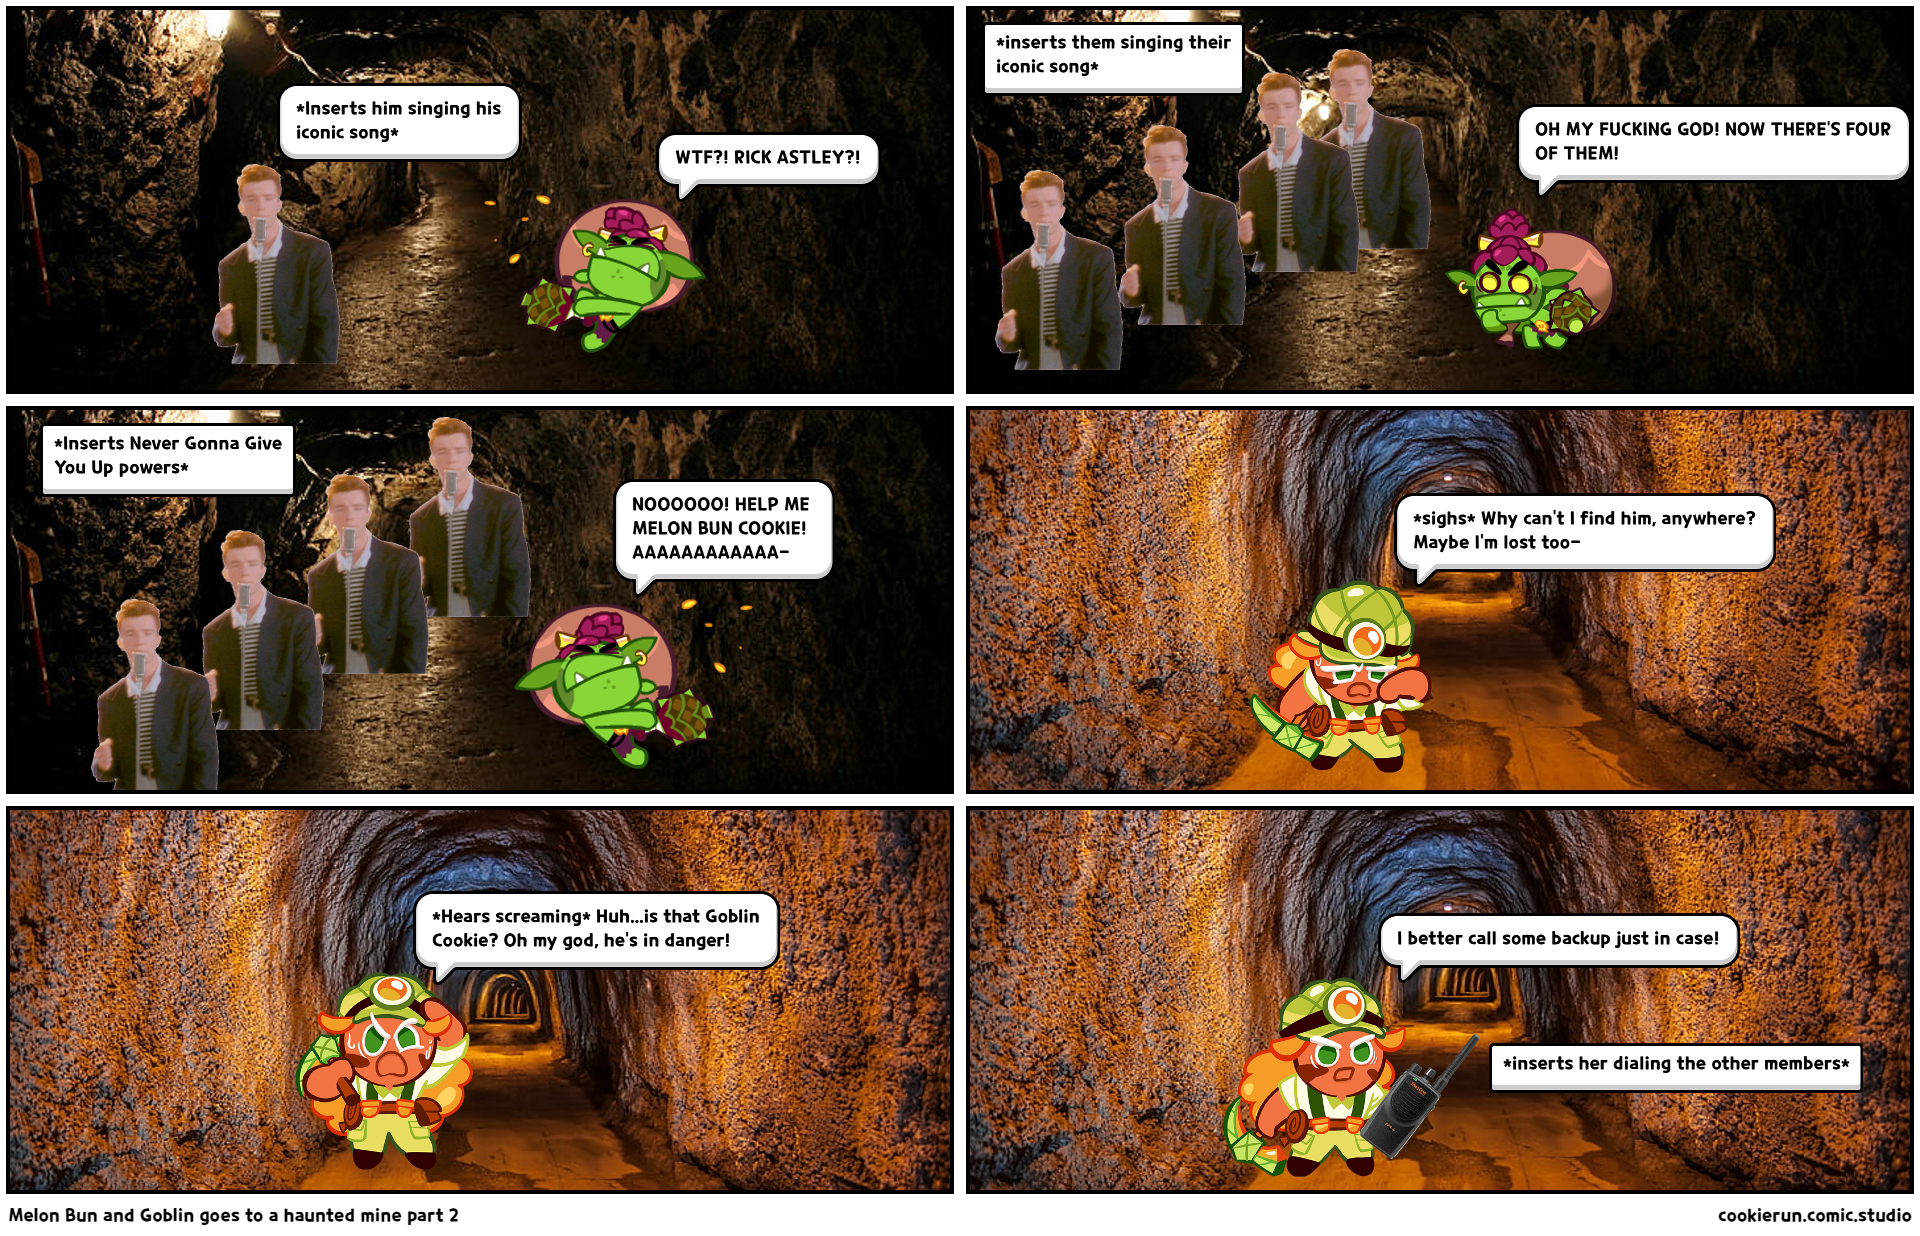 Melon Bun and Goblin goes to a haunted mine part 2